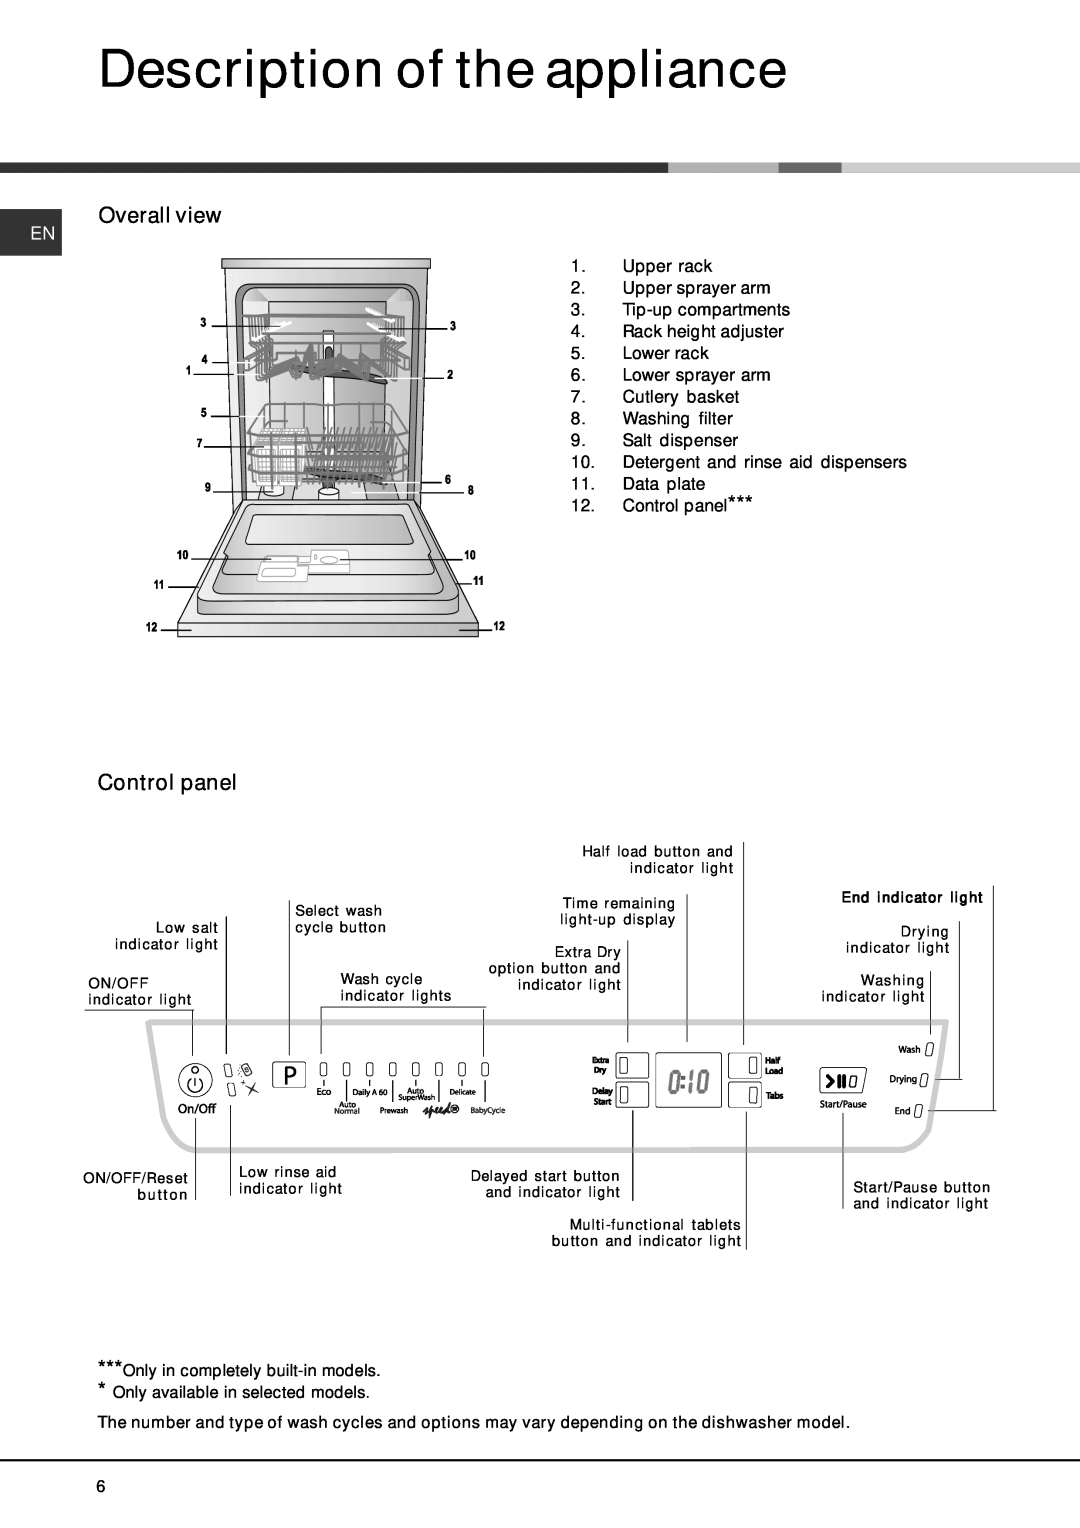 Hotpoint FDFF manual Description of the appliance, Overall view, Control panel 